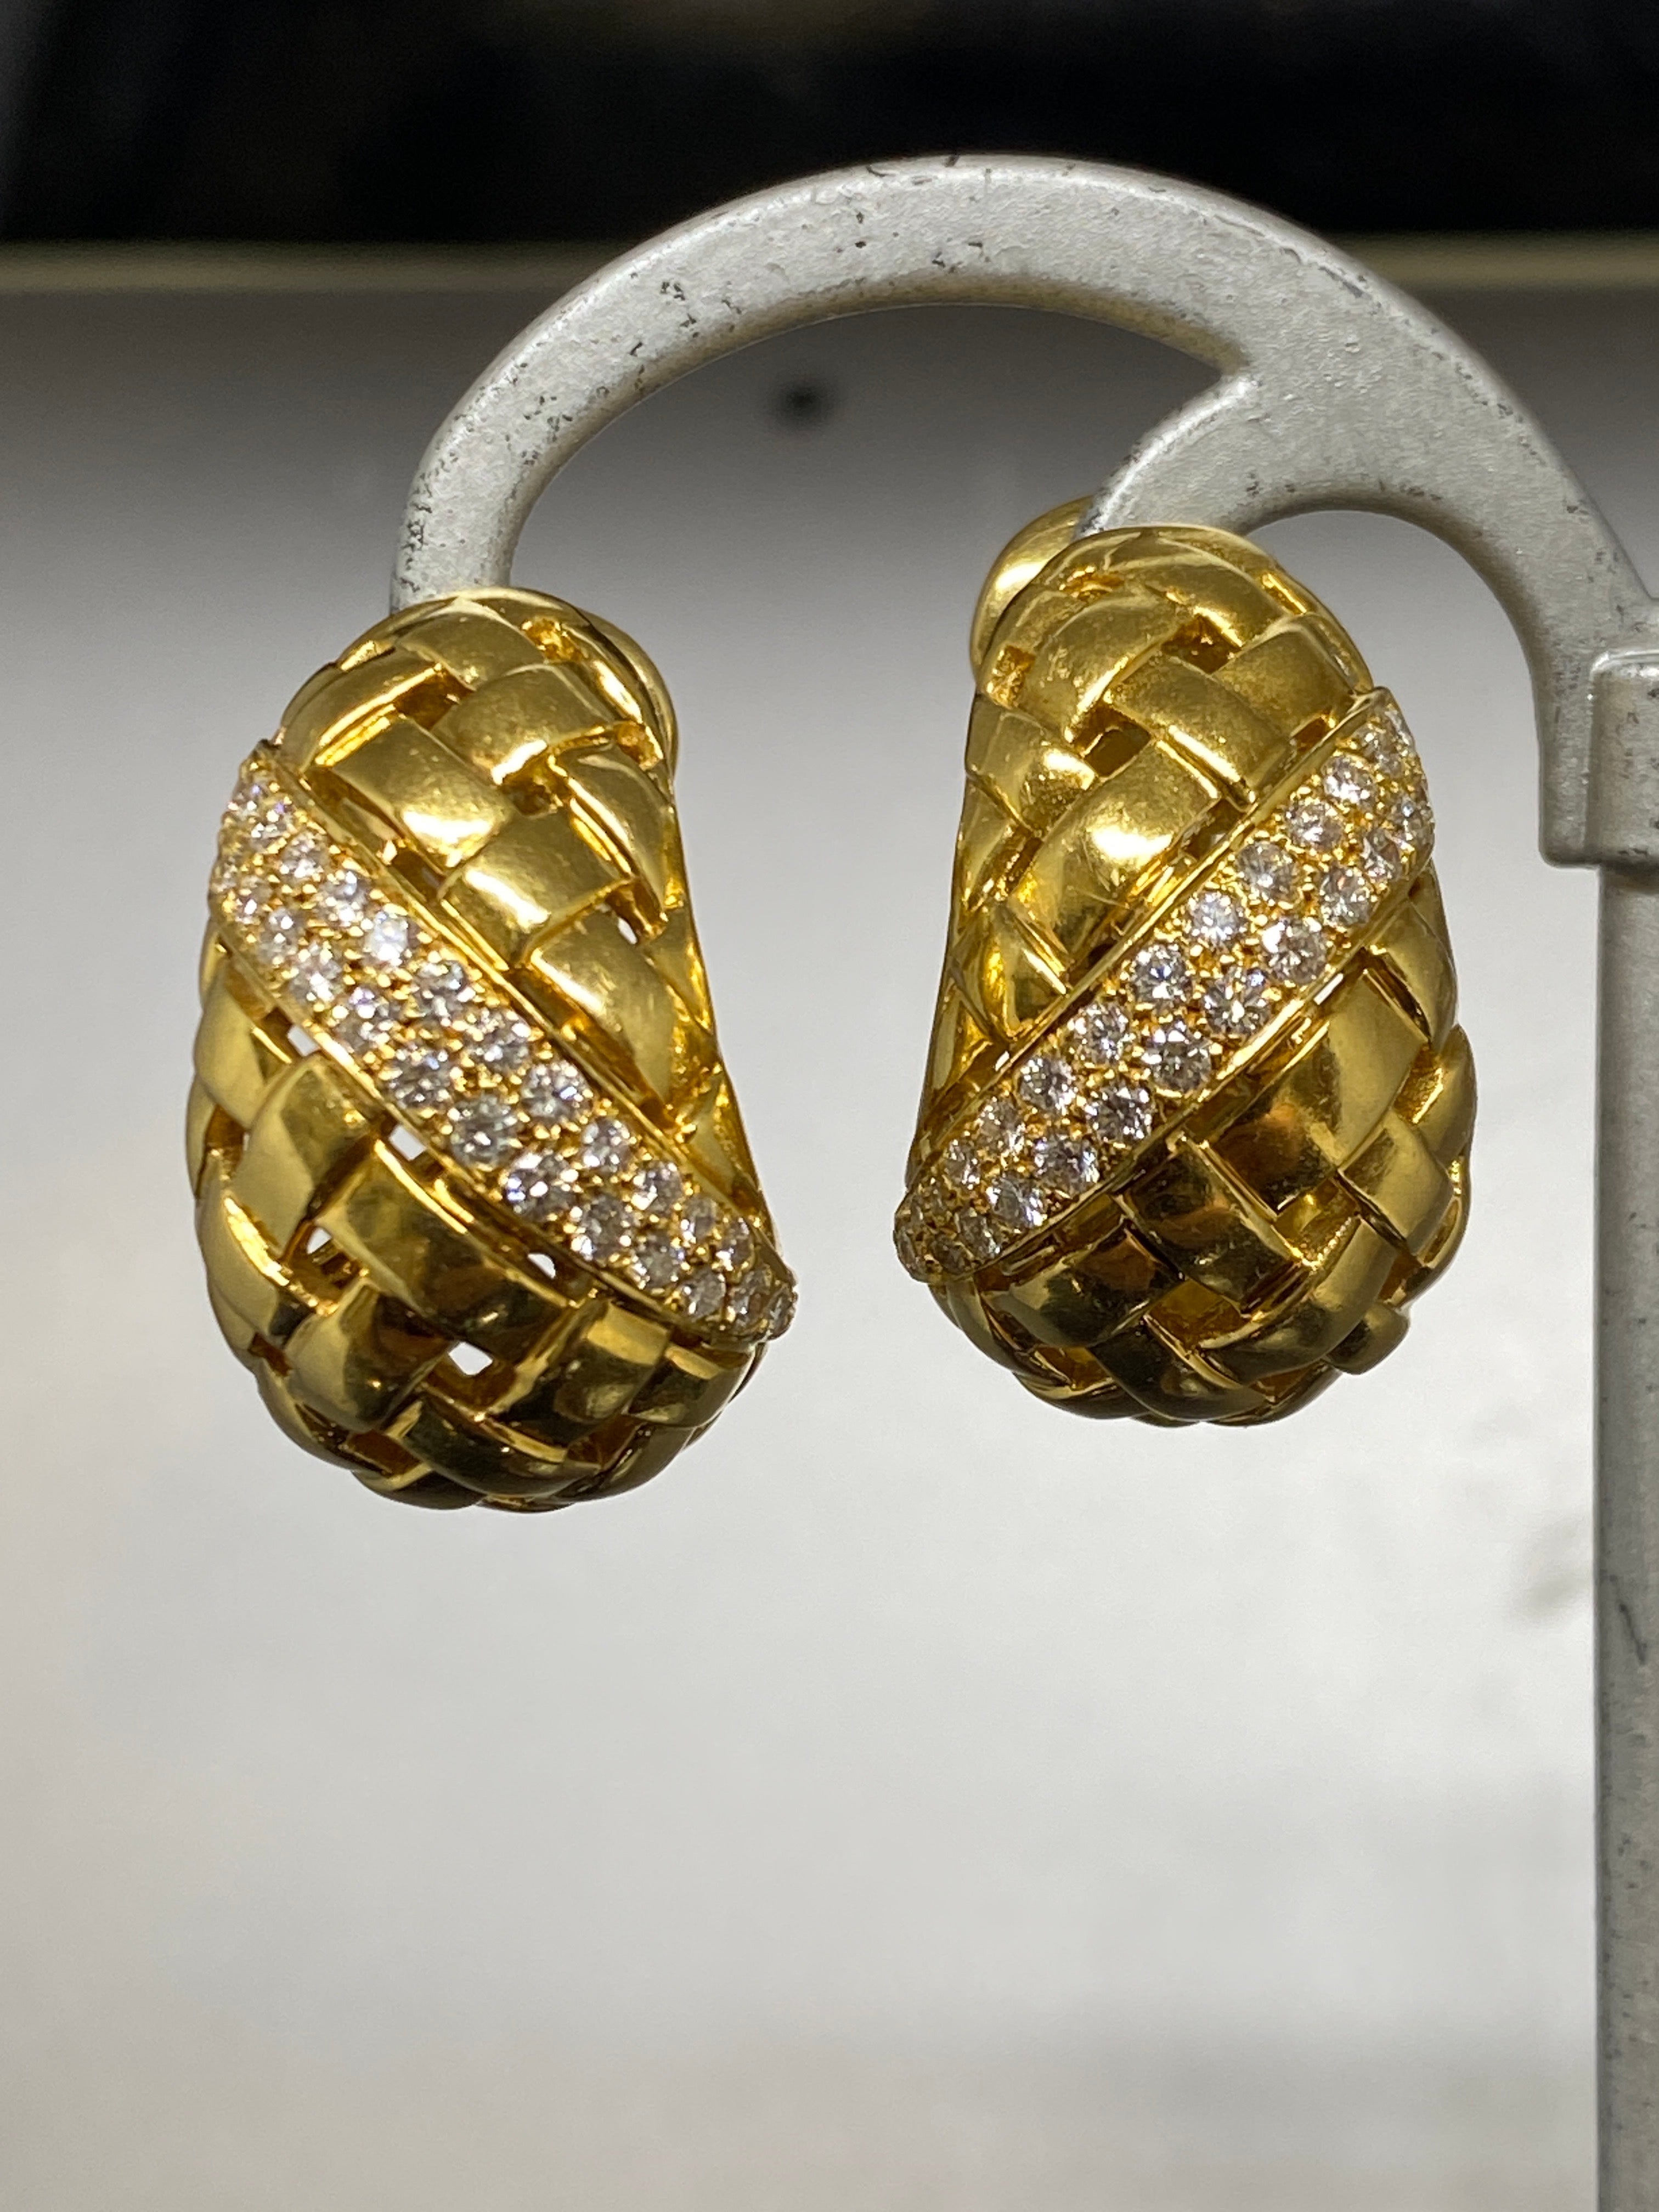 Elegant and timeless vintage polished 18k yellow gold Tiffany & Co. diamond earrings from their 